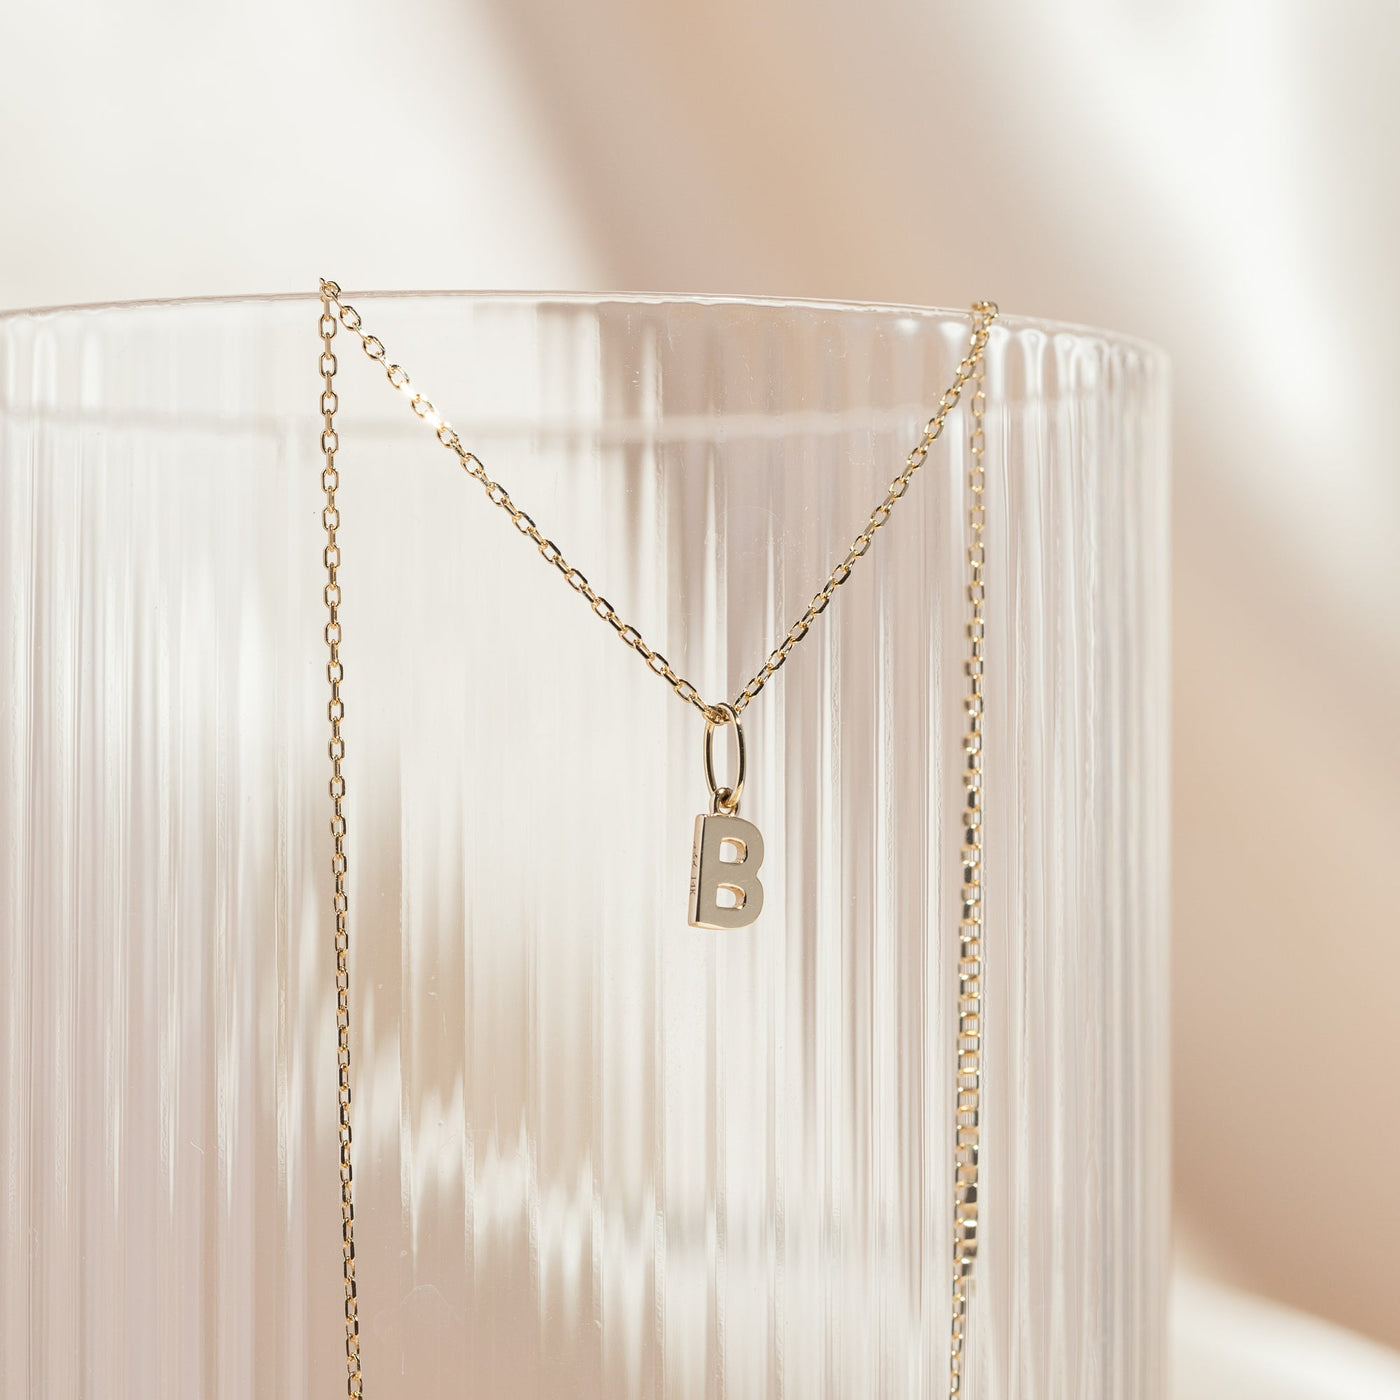 A B C D E F G H I J K L M N O P Q R S T U V W X Y Z Tiny Hanging Initial Necklace